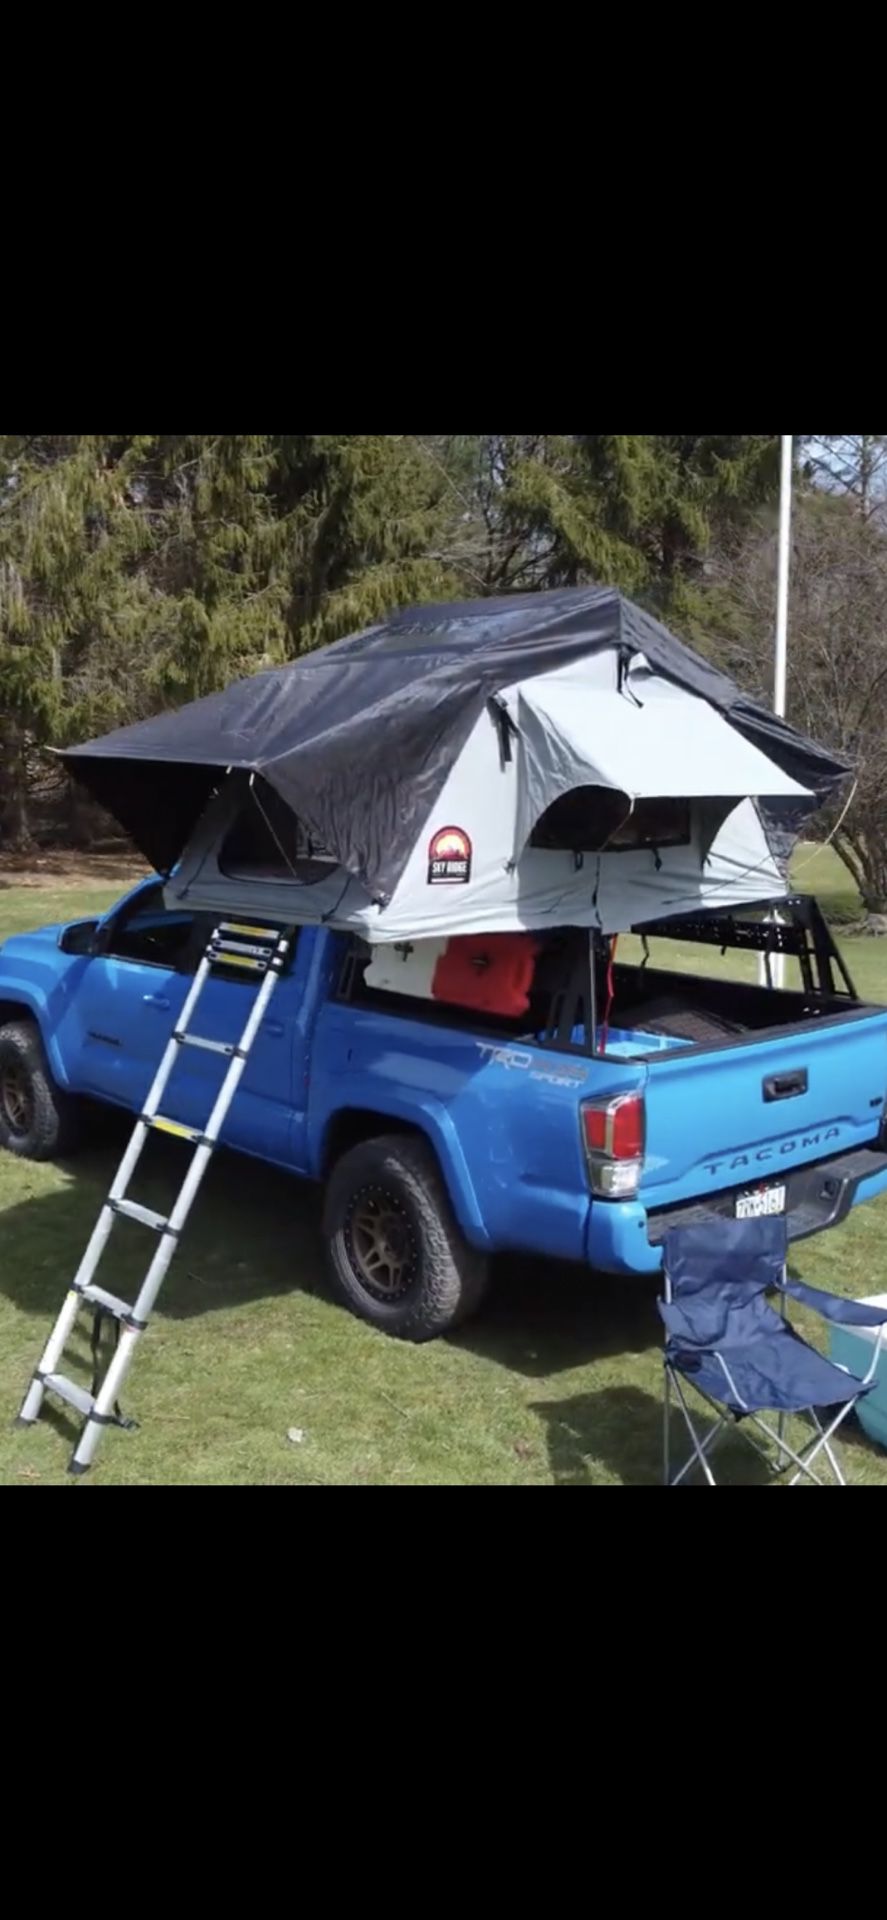 Roof Tent Brand New Never Used $820